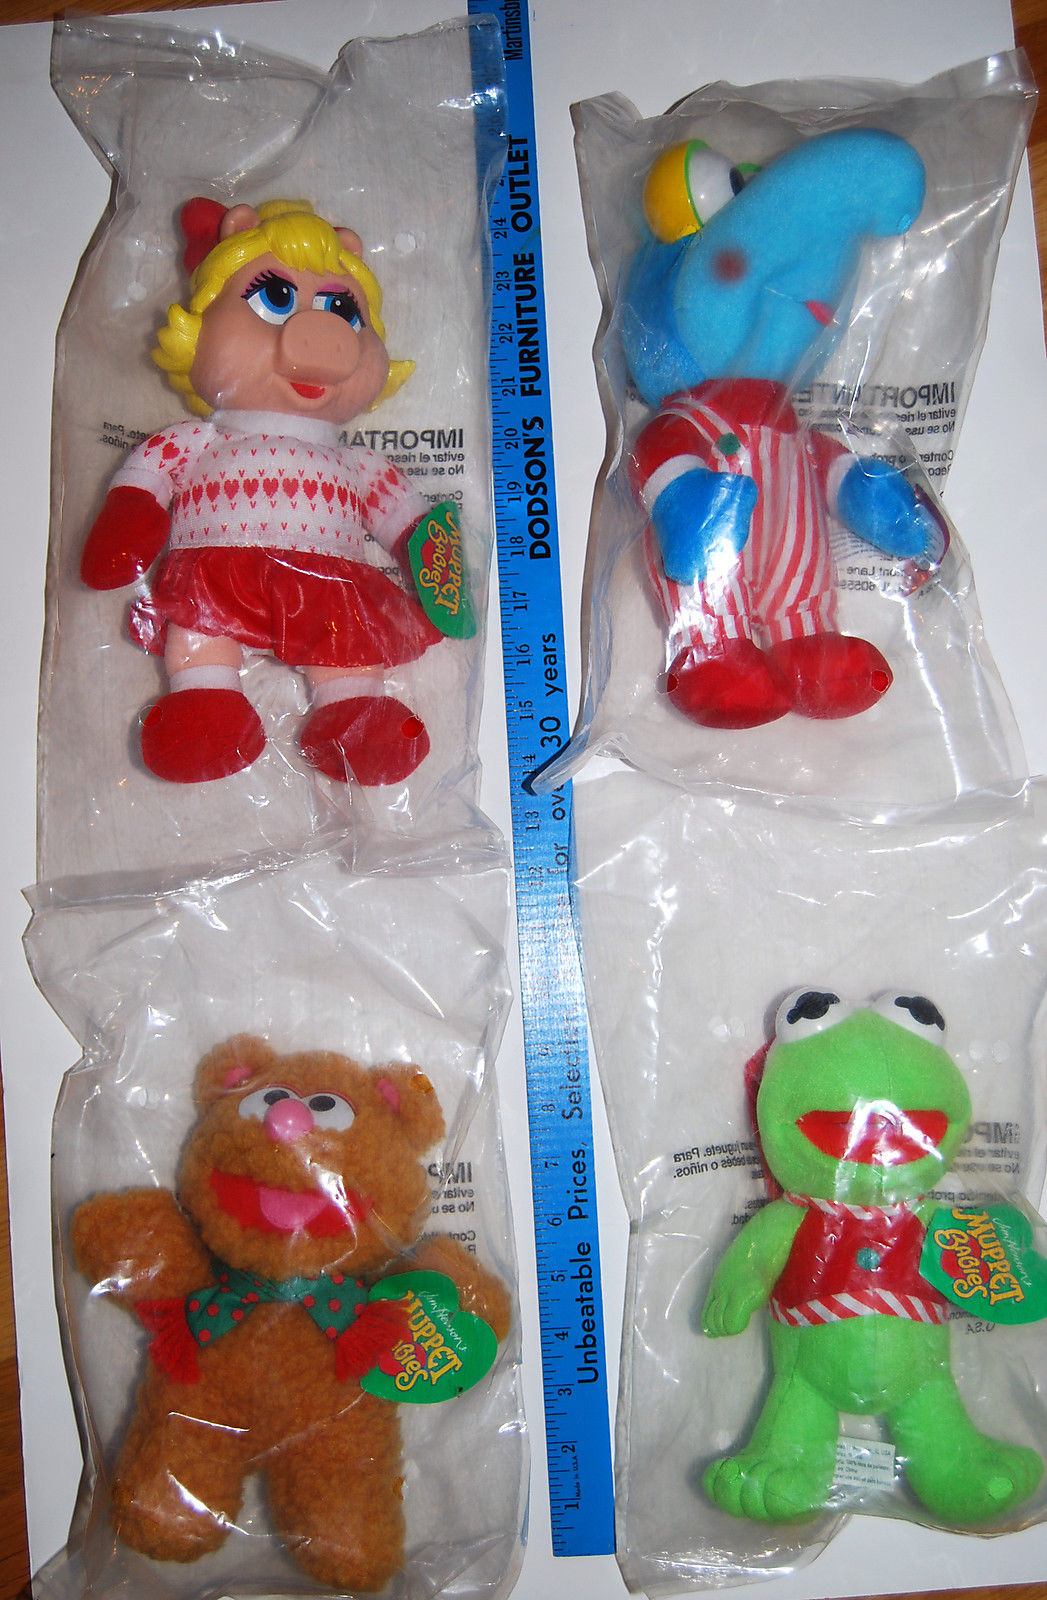 MISS PIGGY Vintage Muppets Christmas Plush: Set of 3 McDonalds Presents BABY KERMIT AND FOZZIE NEW! MINT/SEALED 1988